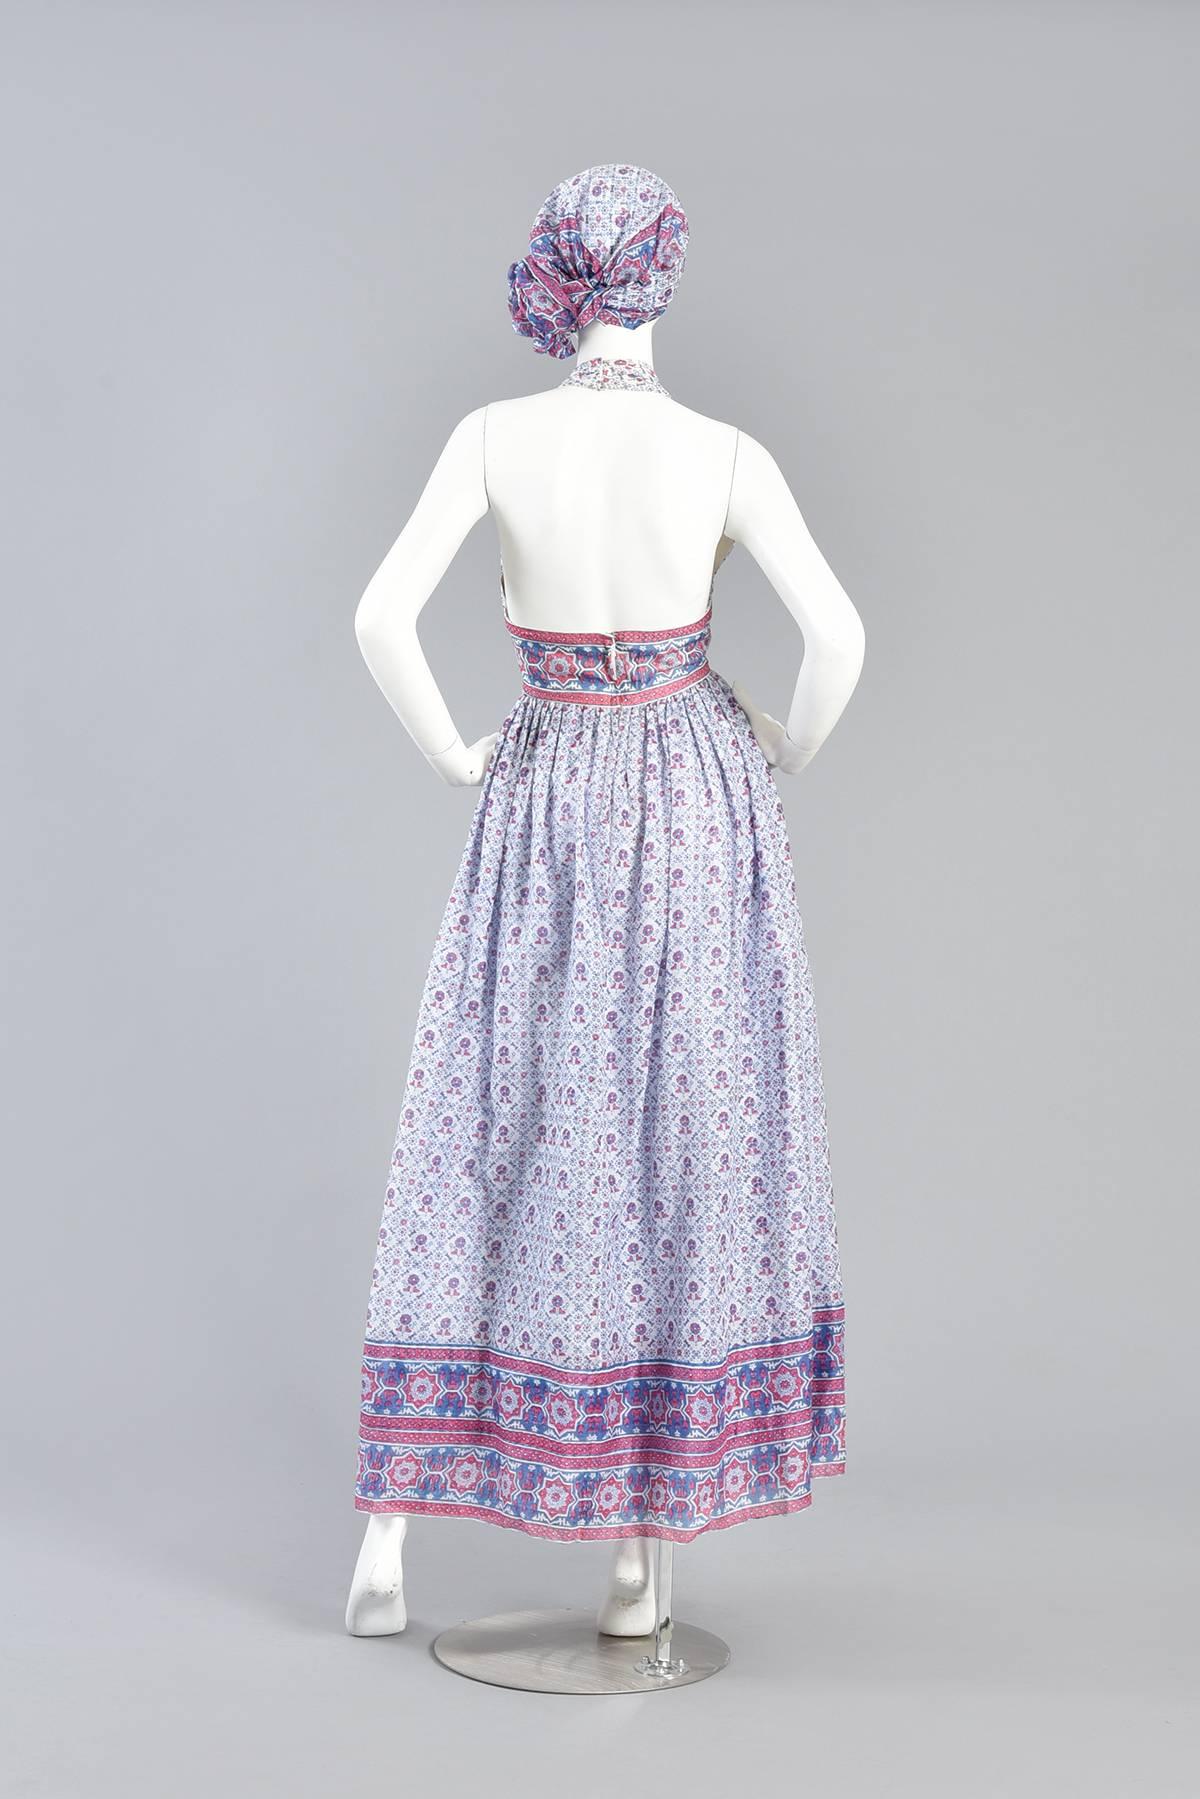 Lovely 1970s Ethnic India Print Backless Cotton Halter Dress with Scarf  For Sale 3